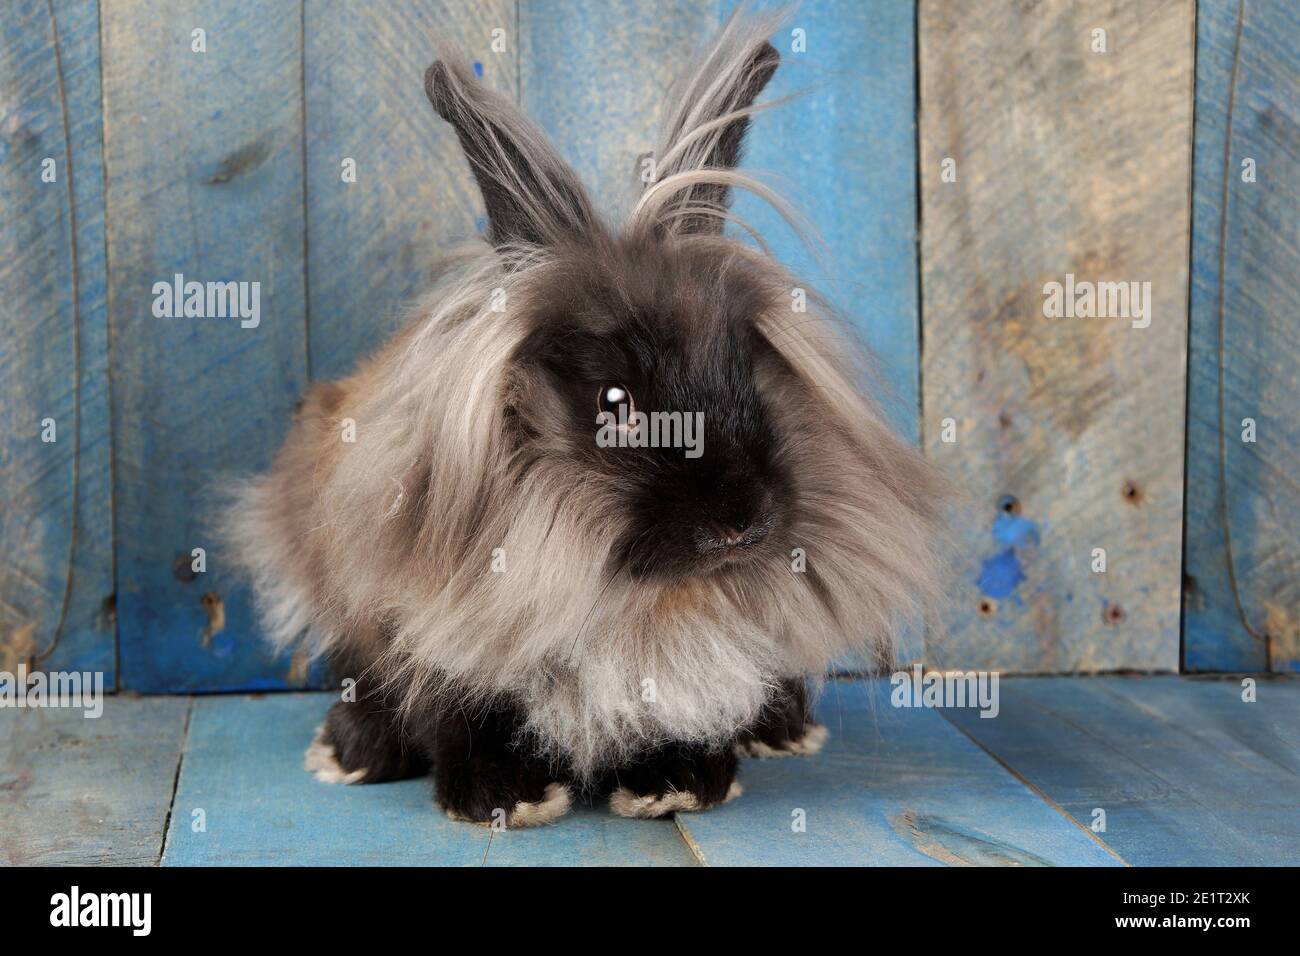 Cute and fluffy dwarf lion head rabbit over blue barnwood background Stock Photo